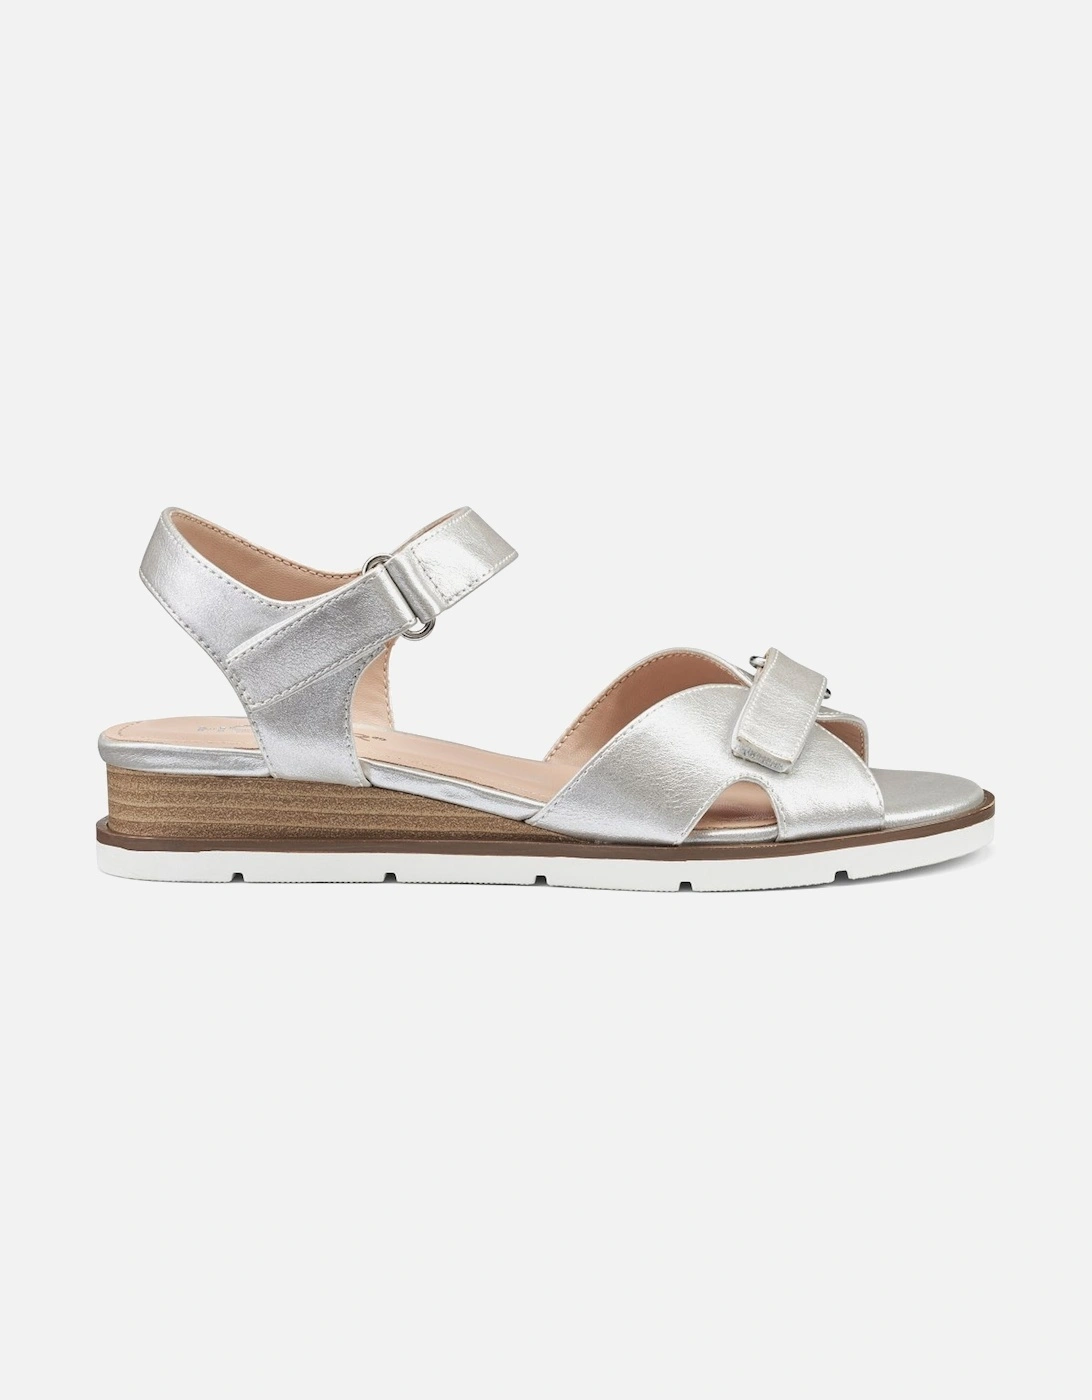 Syros Womens Wedge Sandals